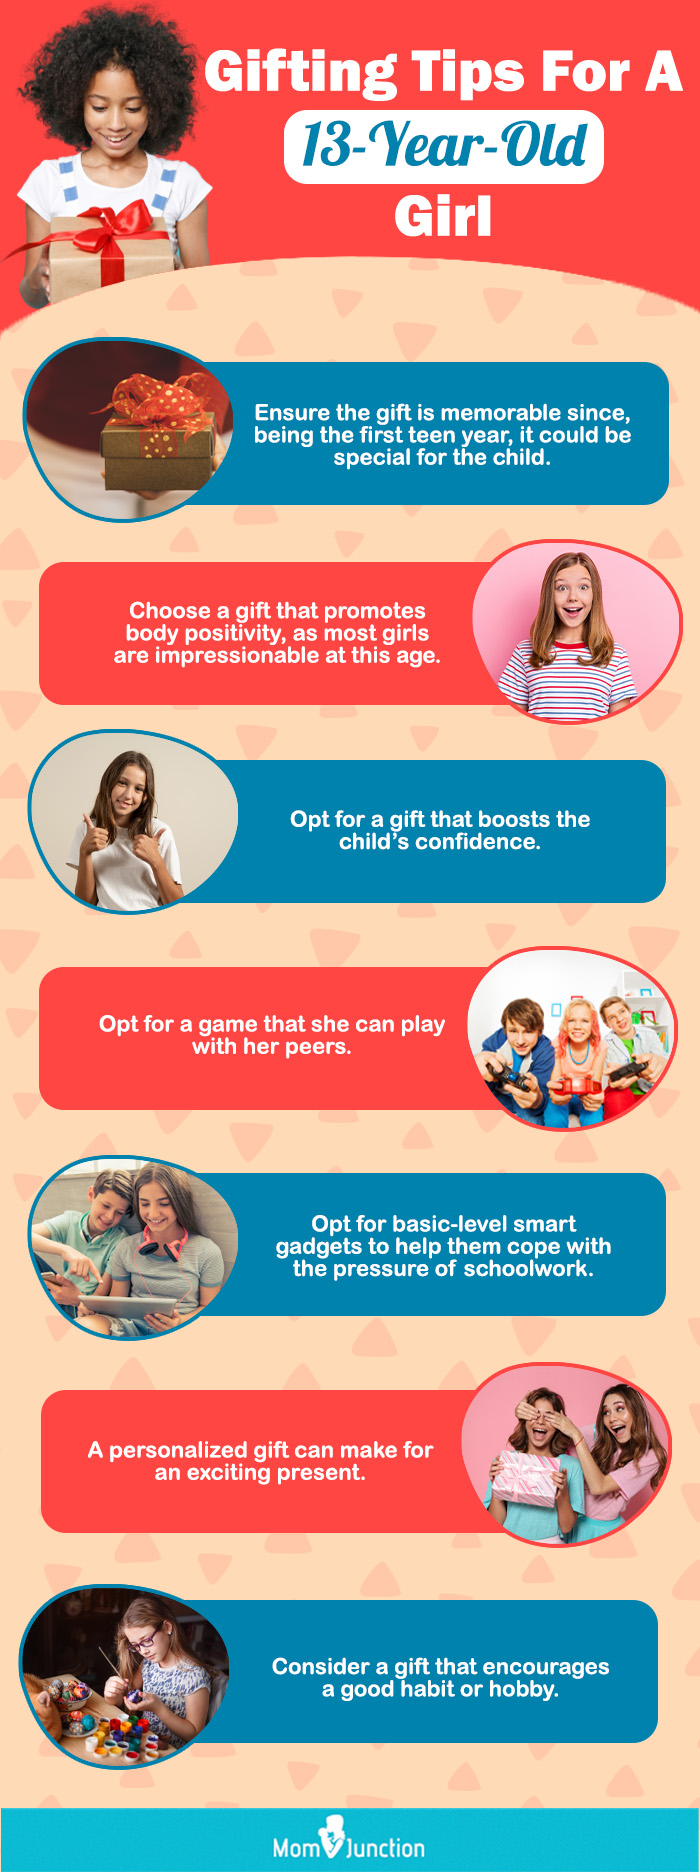 Gifting Tips For A 13-Year-Old Girl